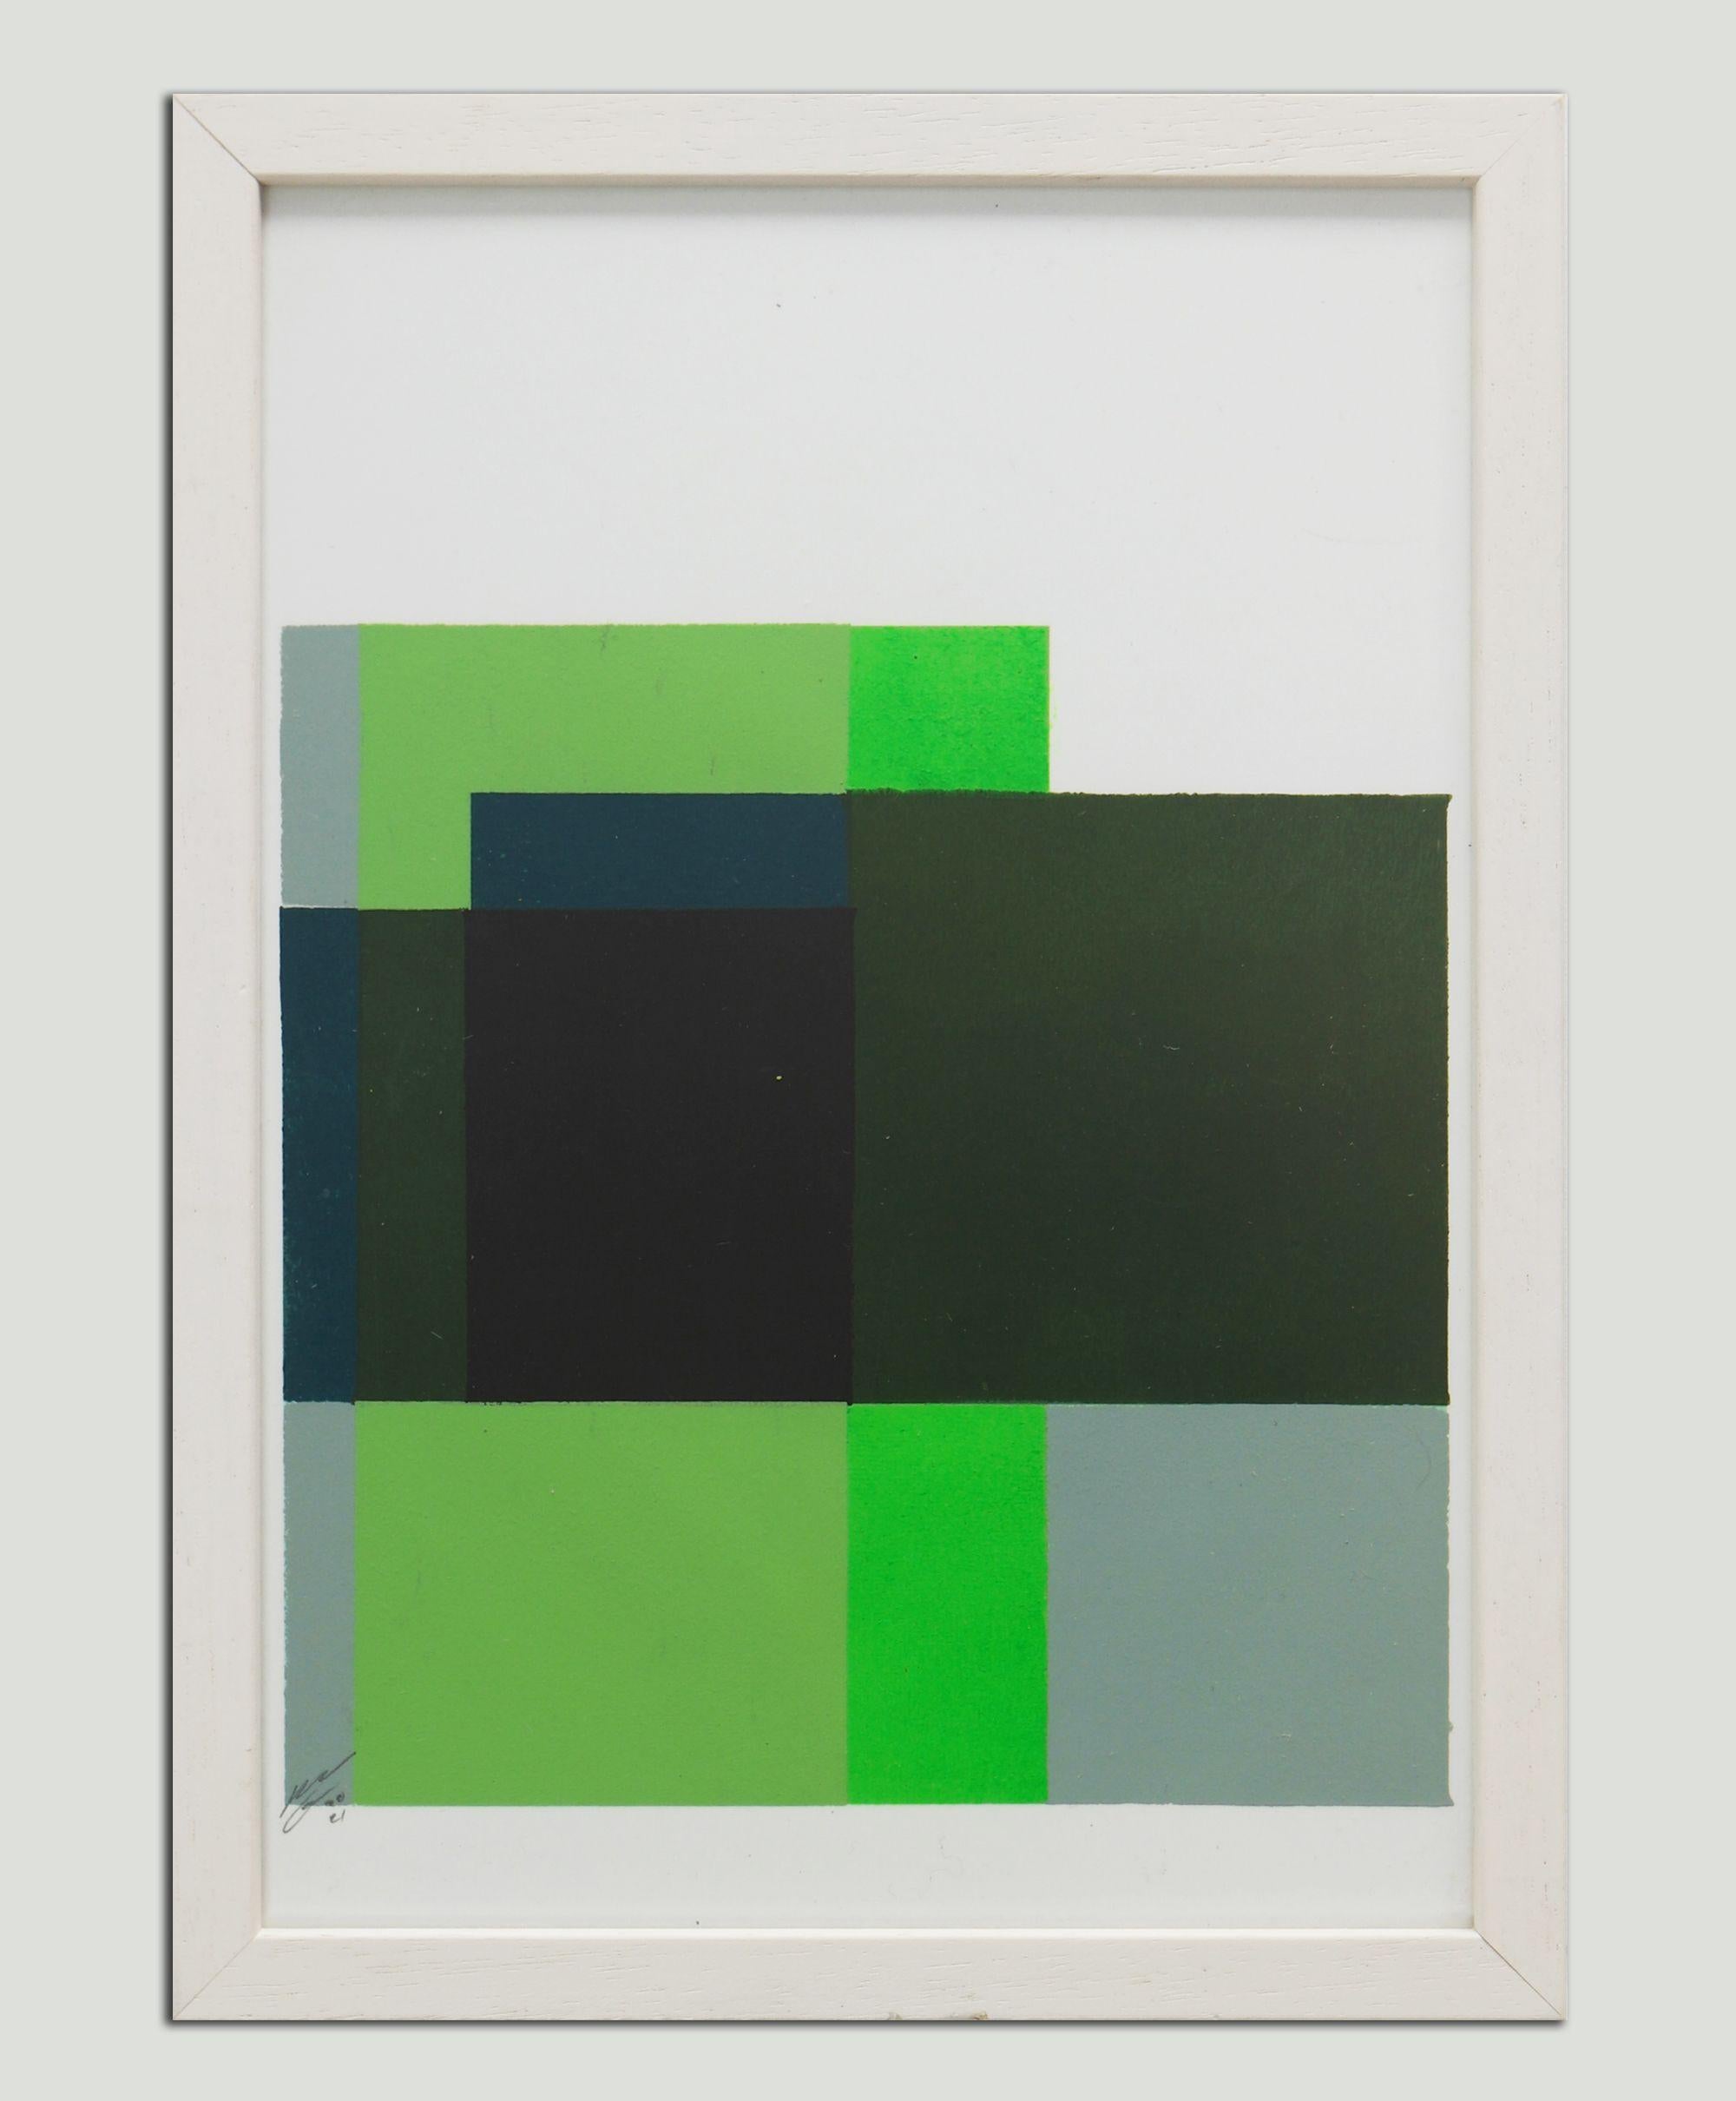 Cubistic Modern Green - Diptych - Incl Frame, Painting, Acrylic on Paper 2